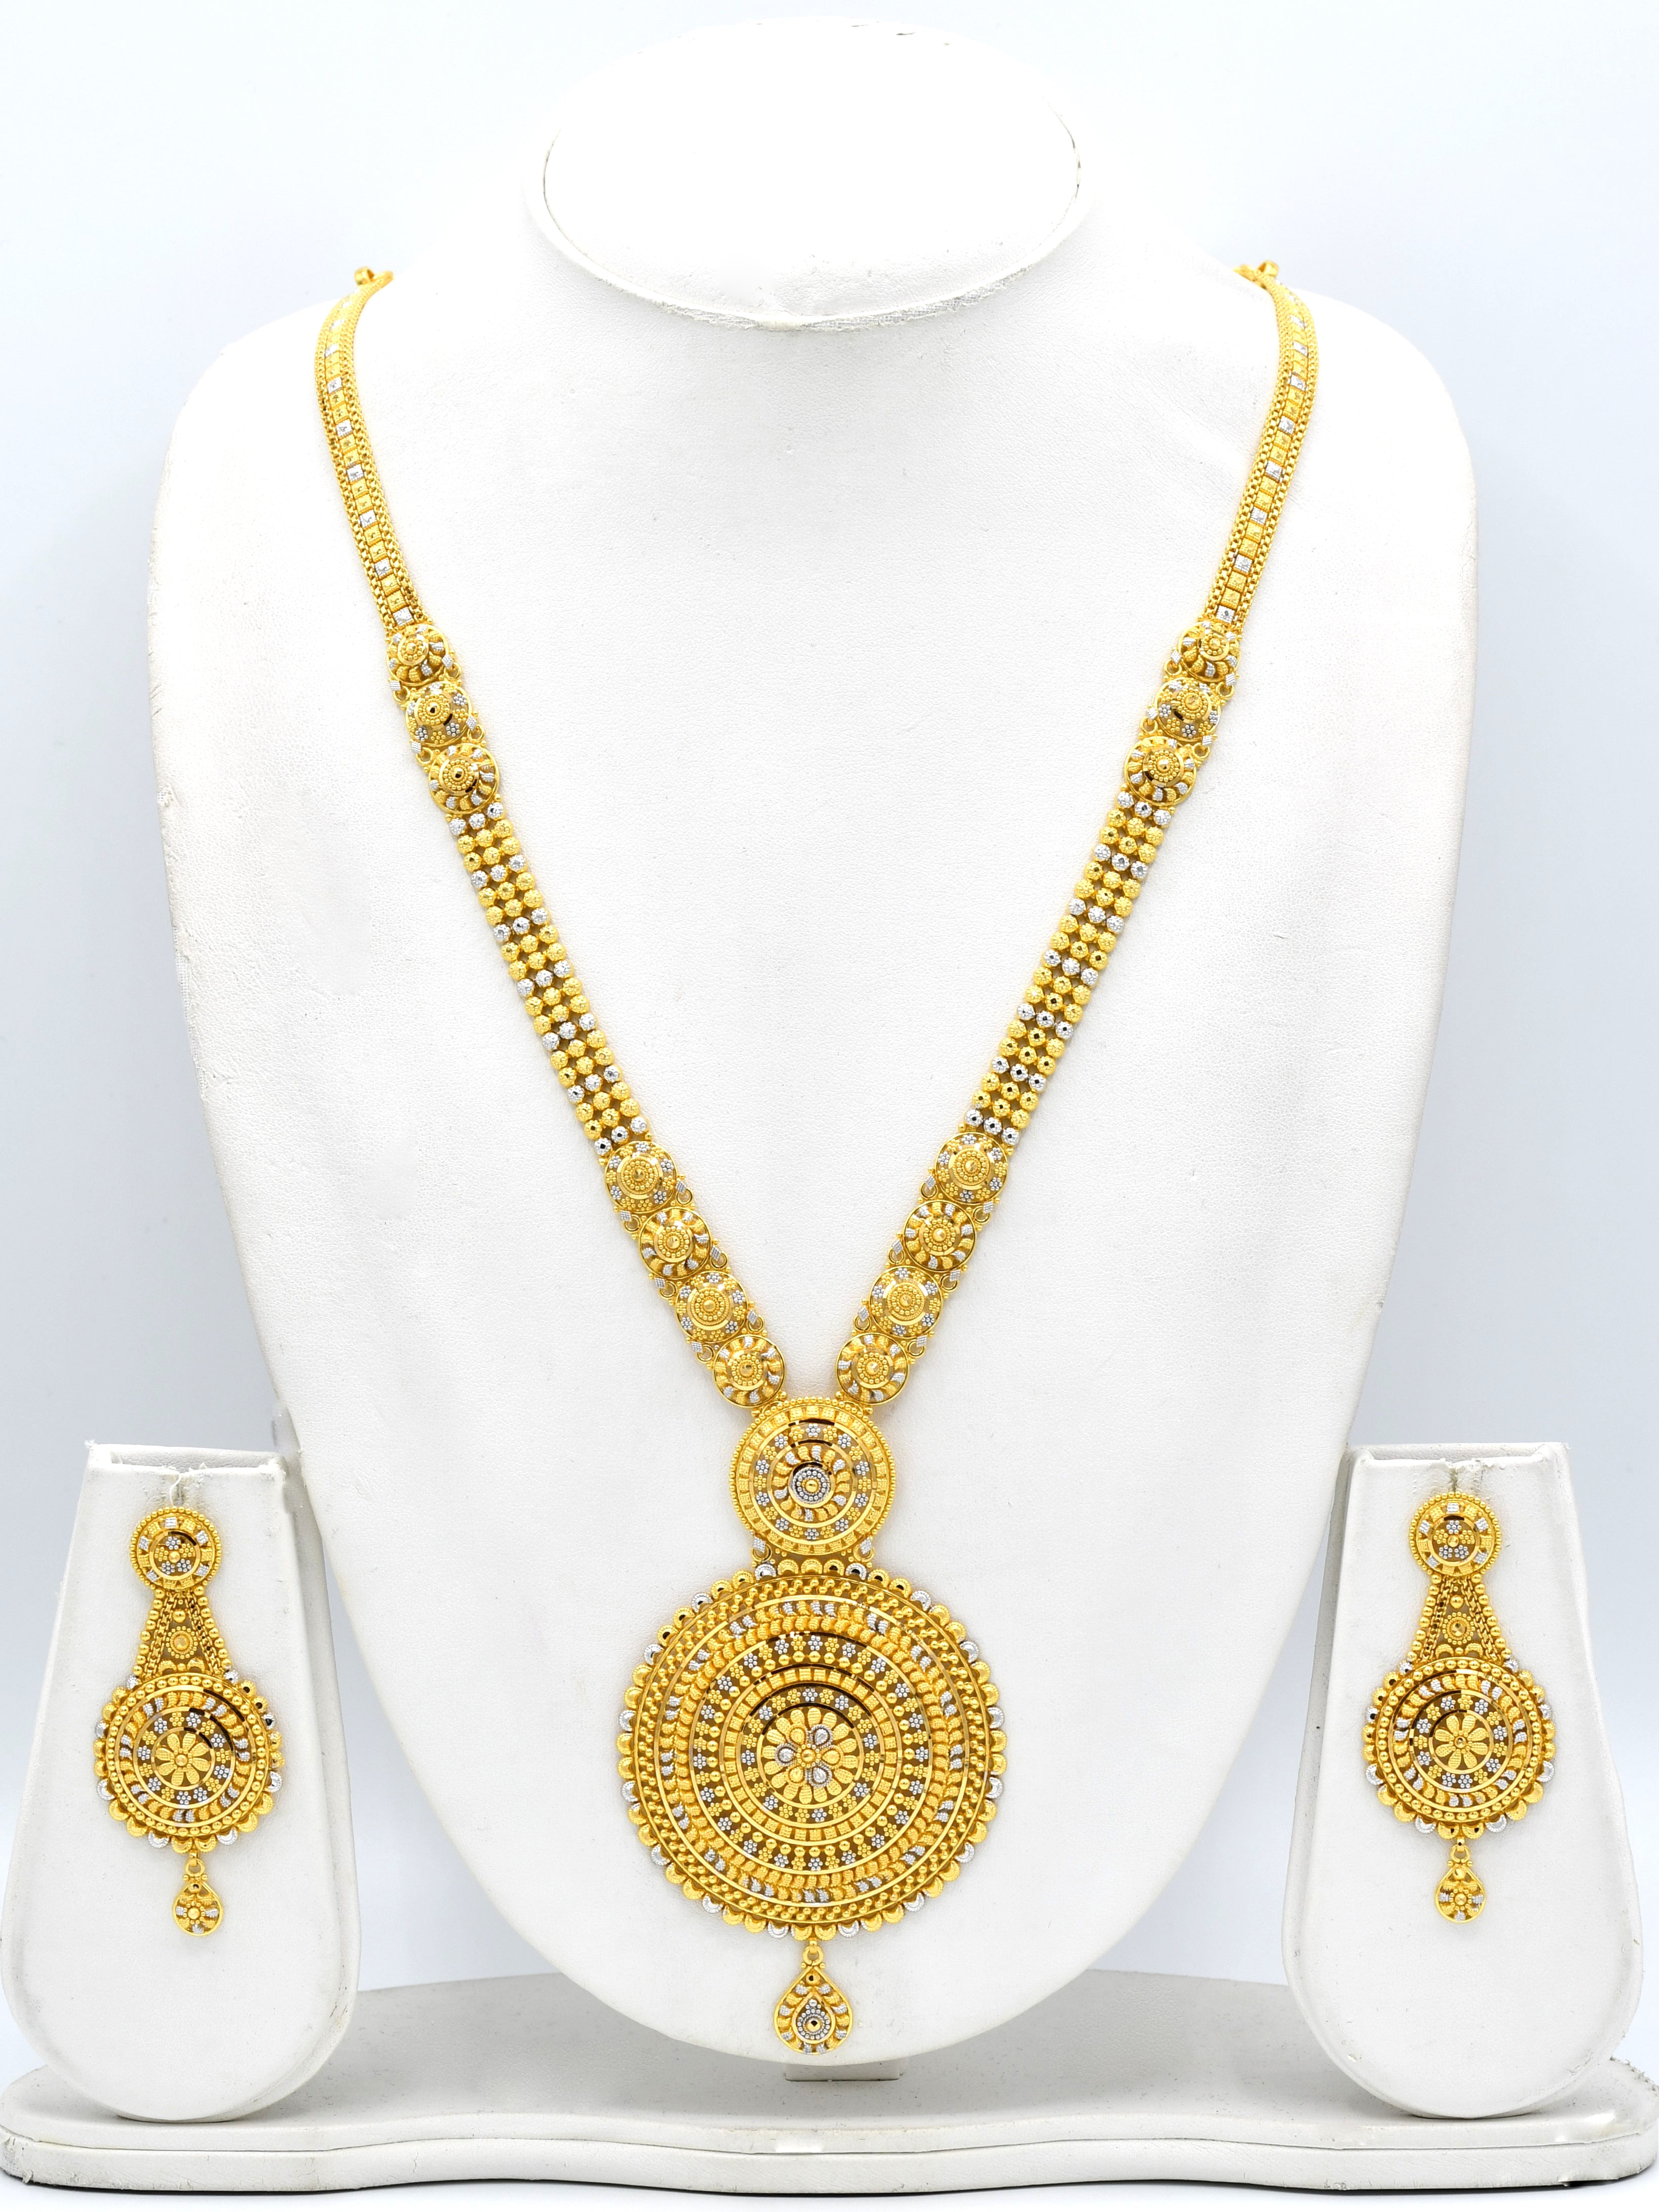 22ct Gold Filigree Two Tone Long Necklace Set - Roop Darshan